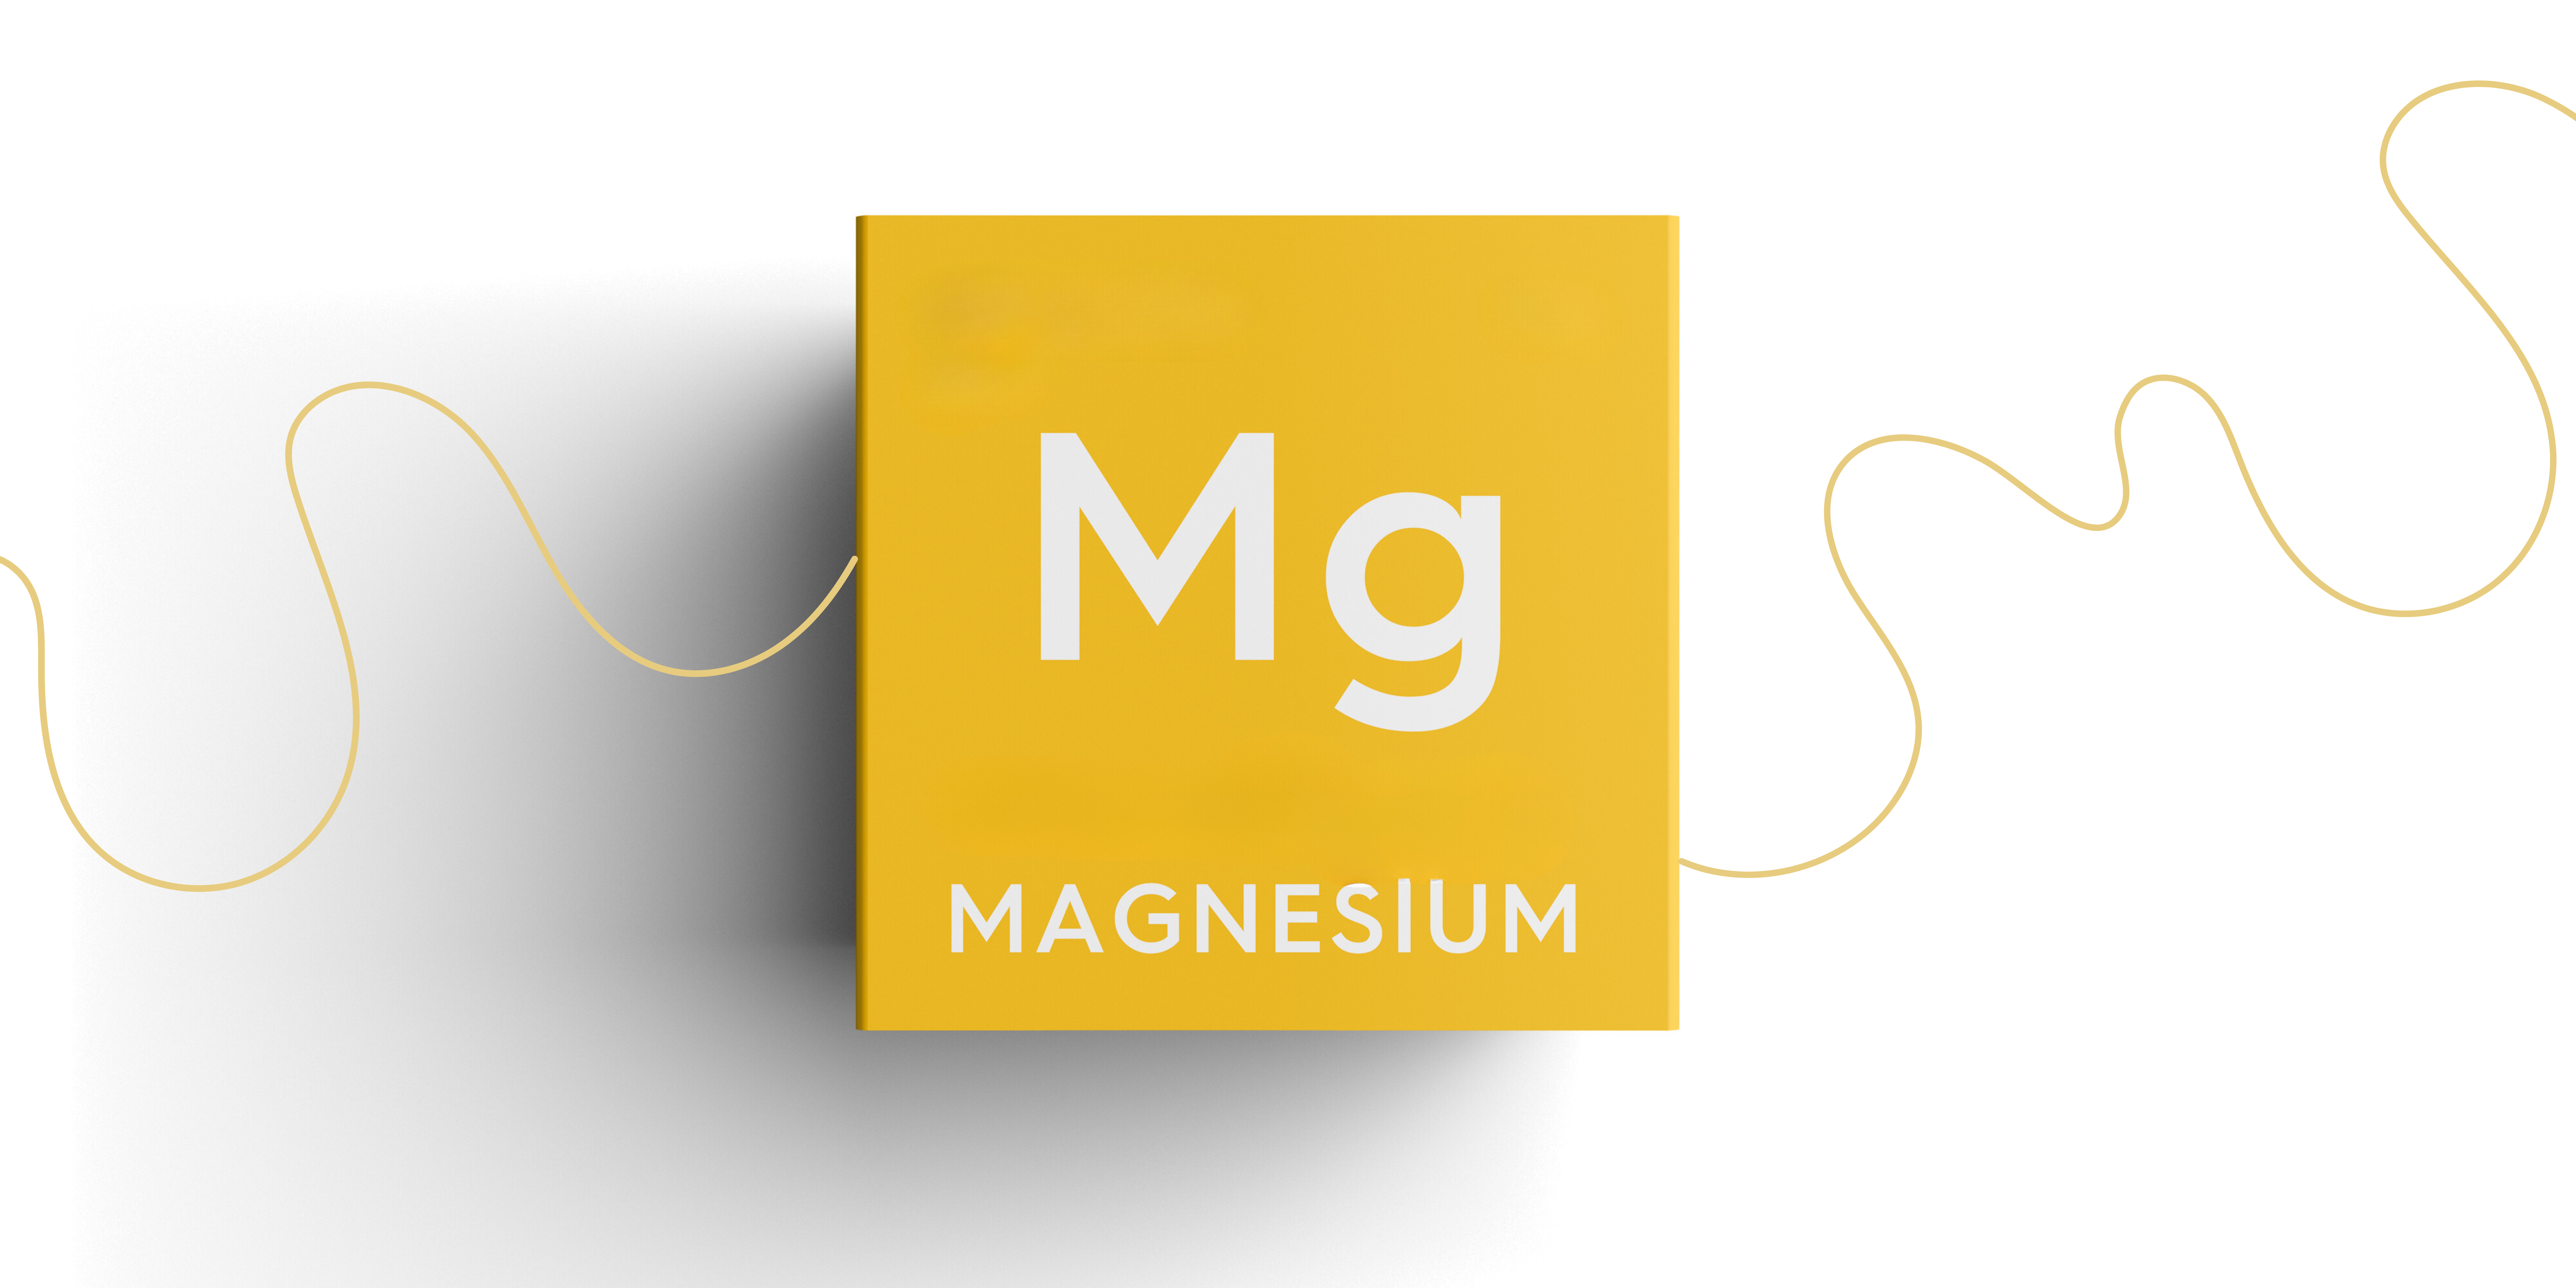 What's All the Hype About Magnesium?